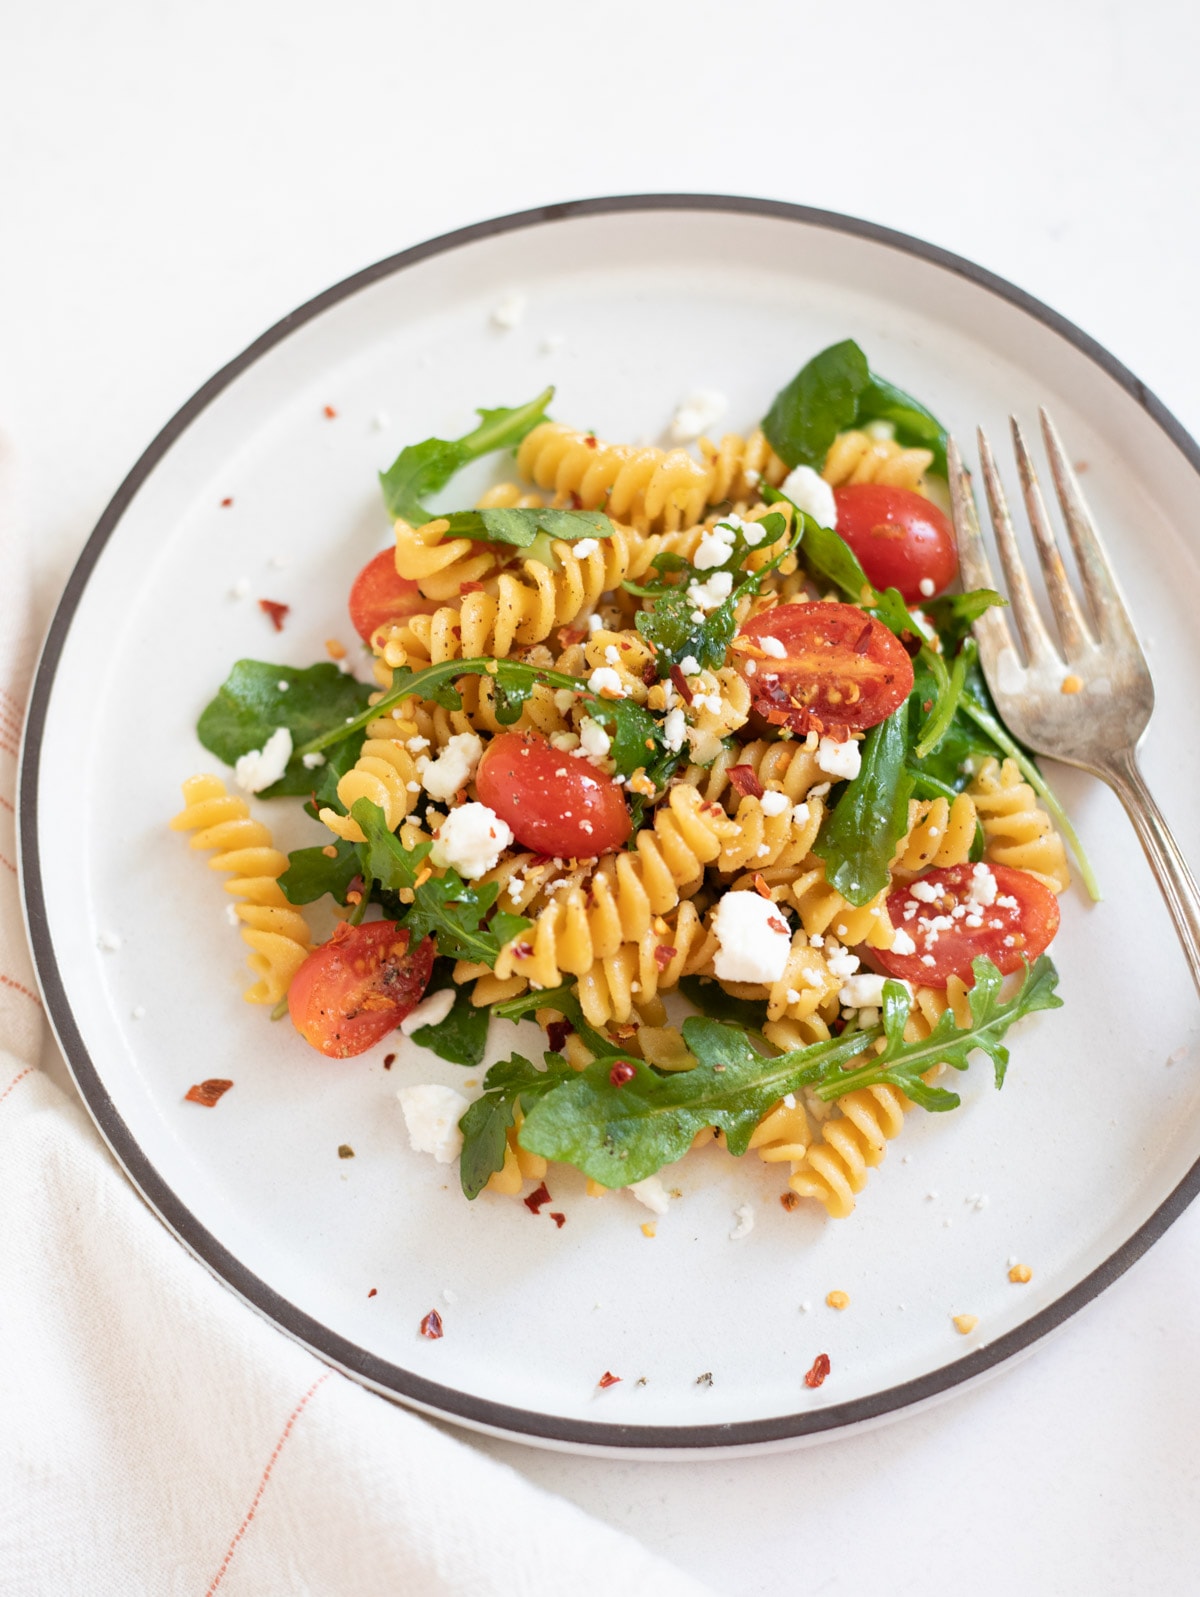 Rotini with arugula and cherry tomatoes topped with feta